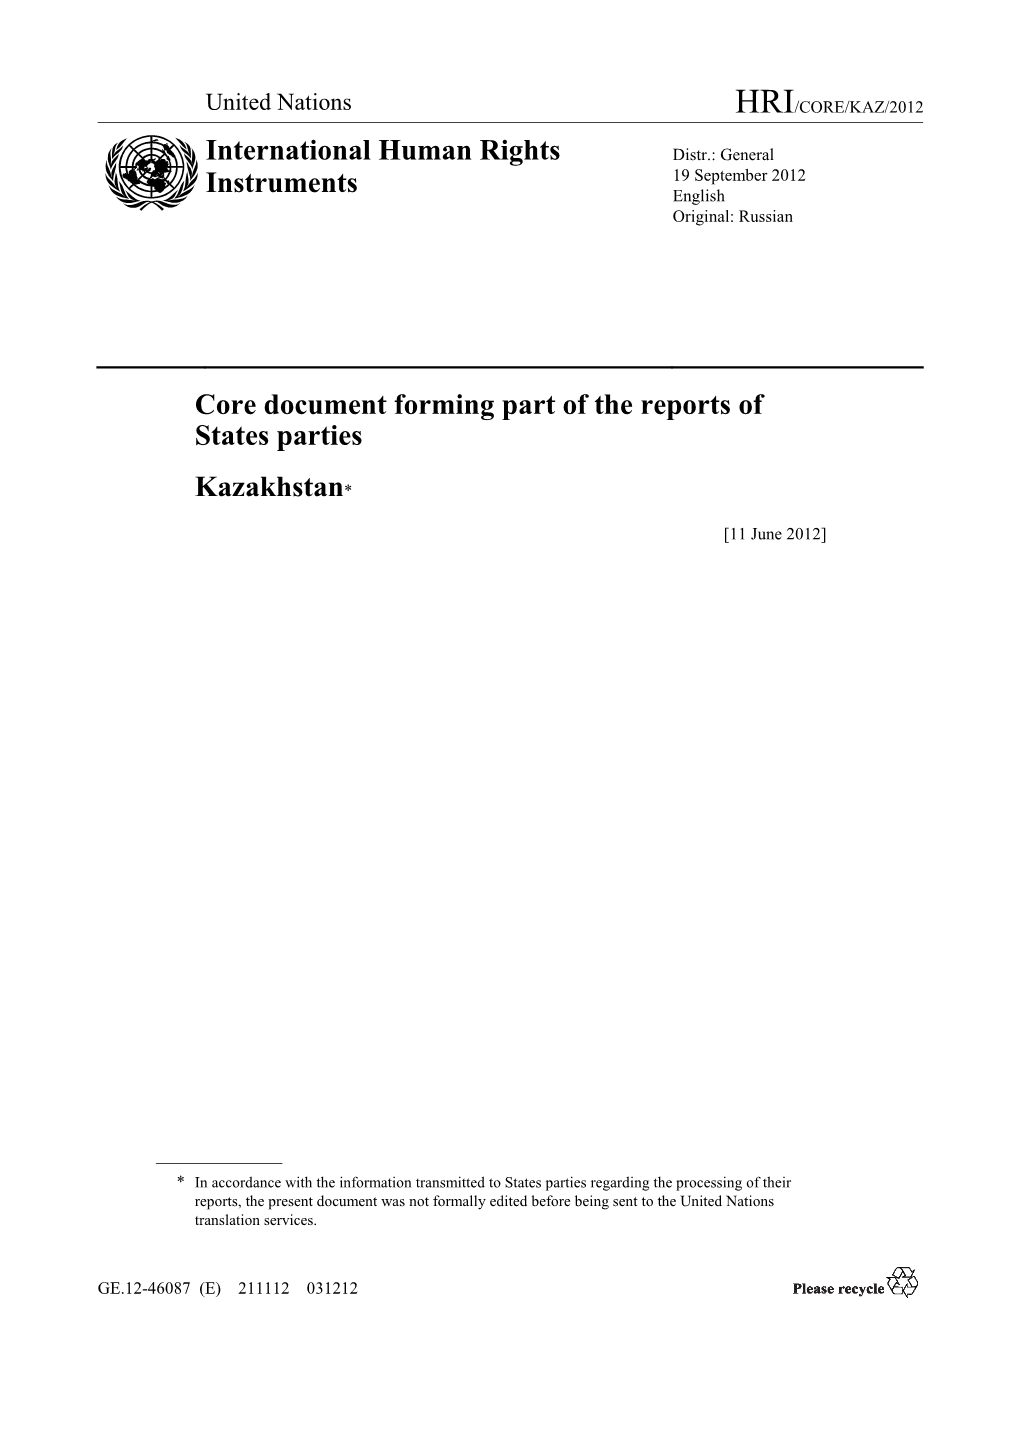 Core Document Forming Part of the Reports of States Parties Kazakhstan